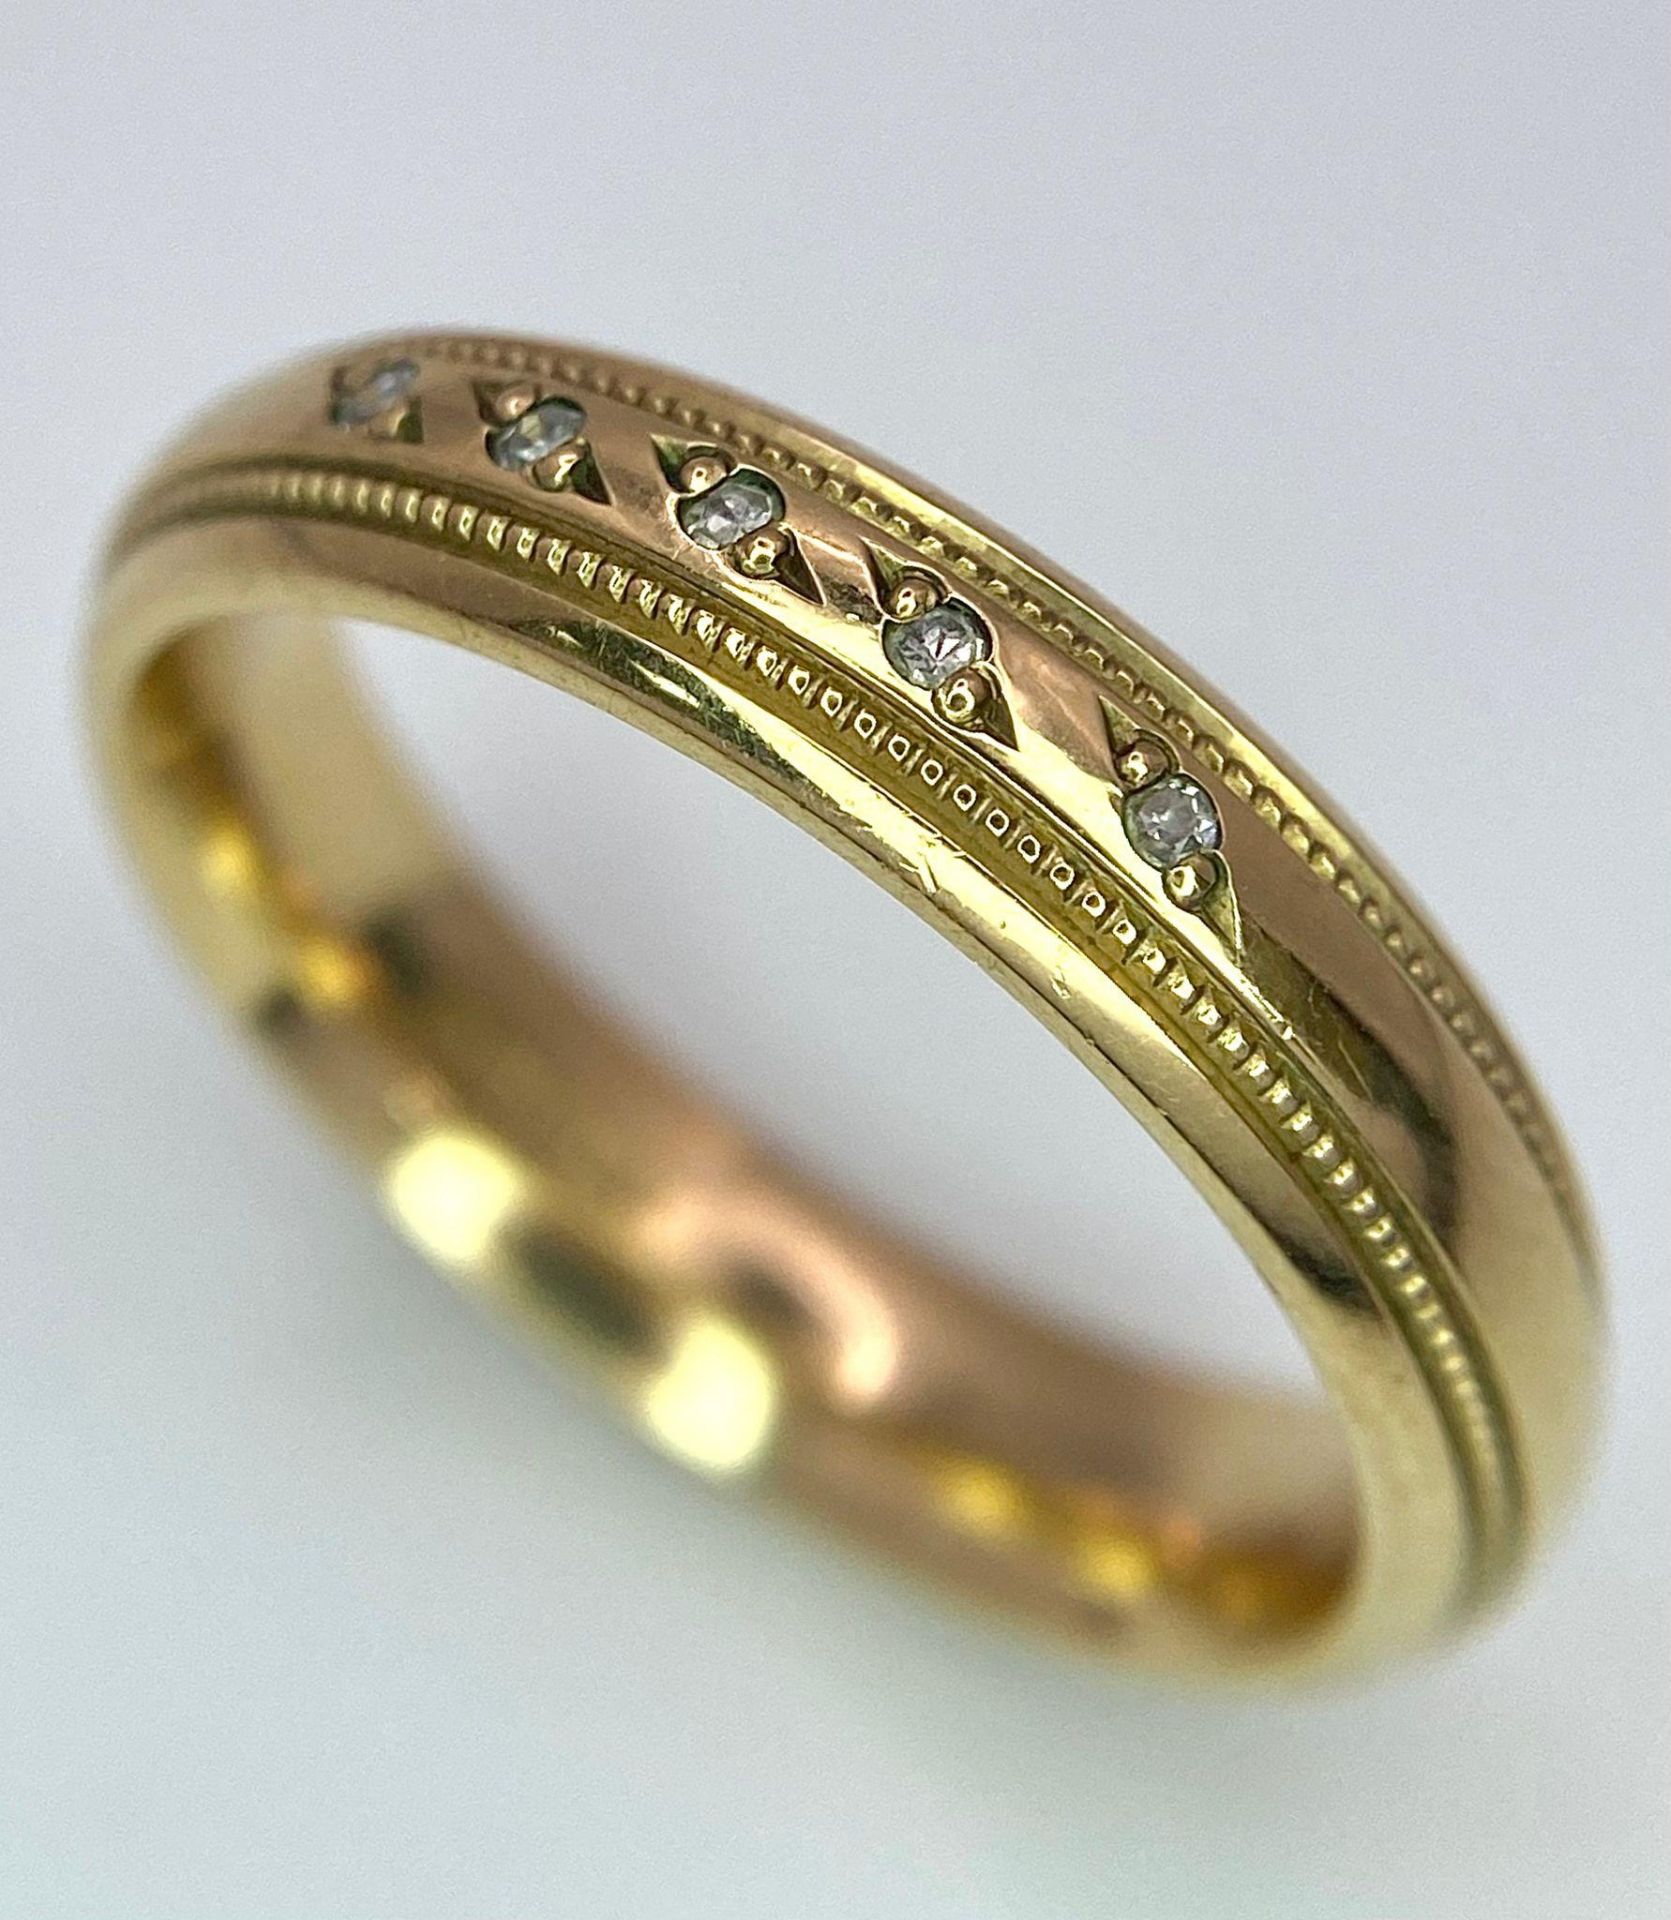 A Vintage 9K Yellow Gold Five Stone Diamond Ring. Size L. 3.75g weight. Full UK hallmarks. - Image 3 of 6